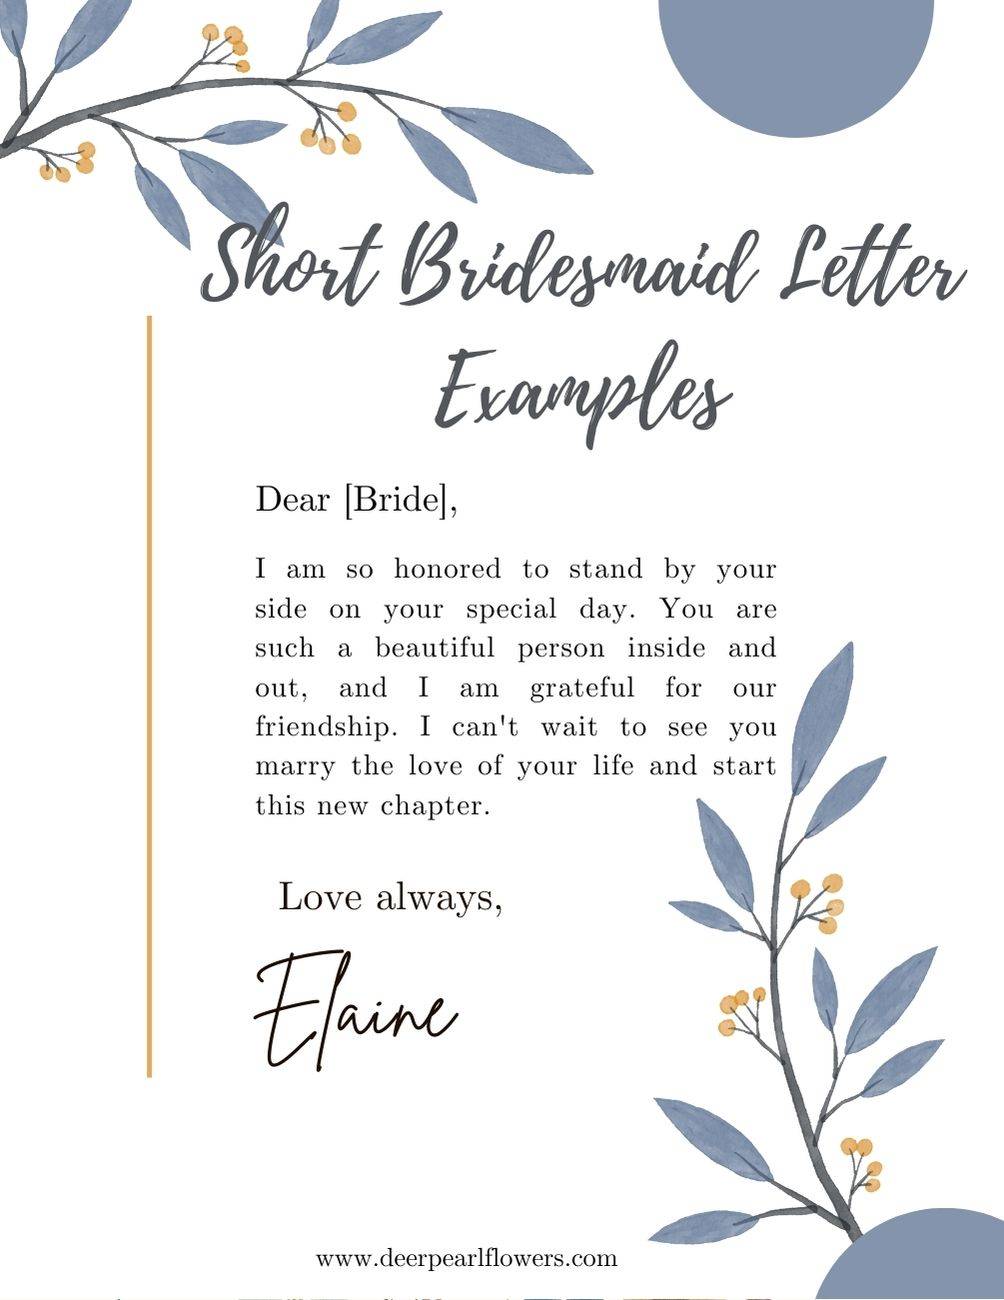 Short Bridesmaid Letter to Bride Examples